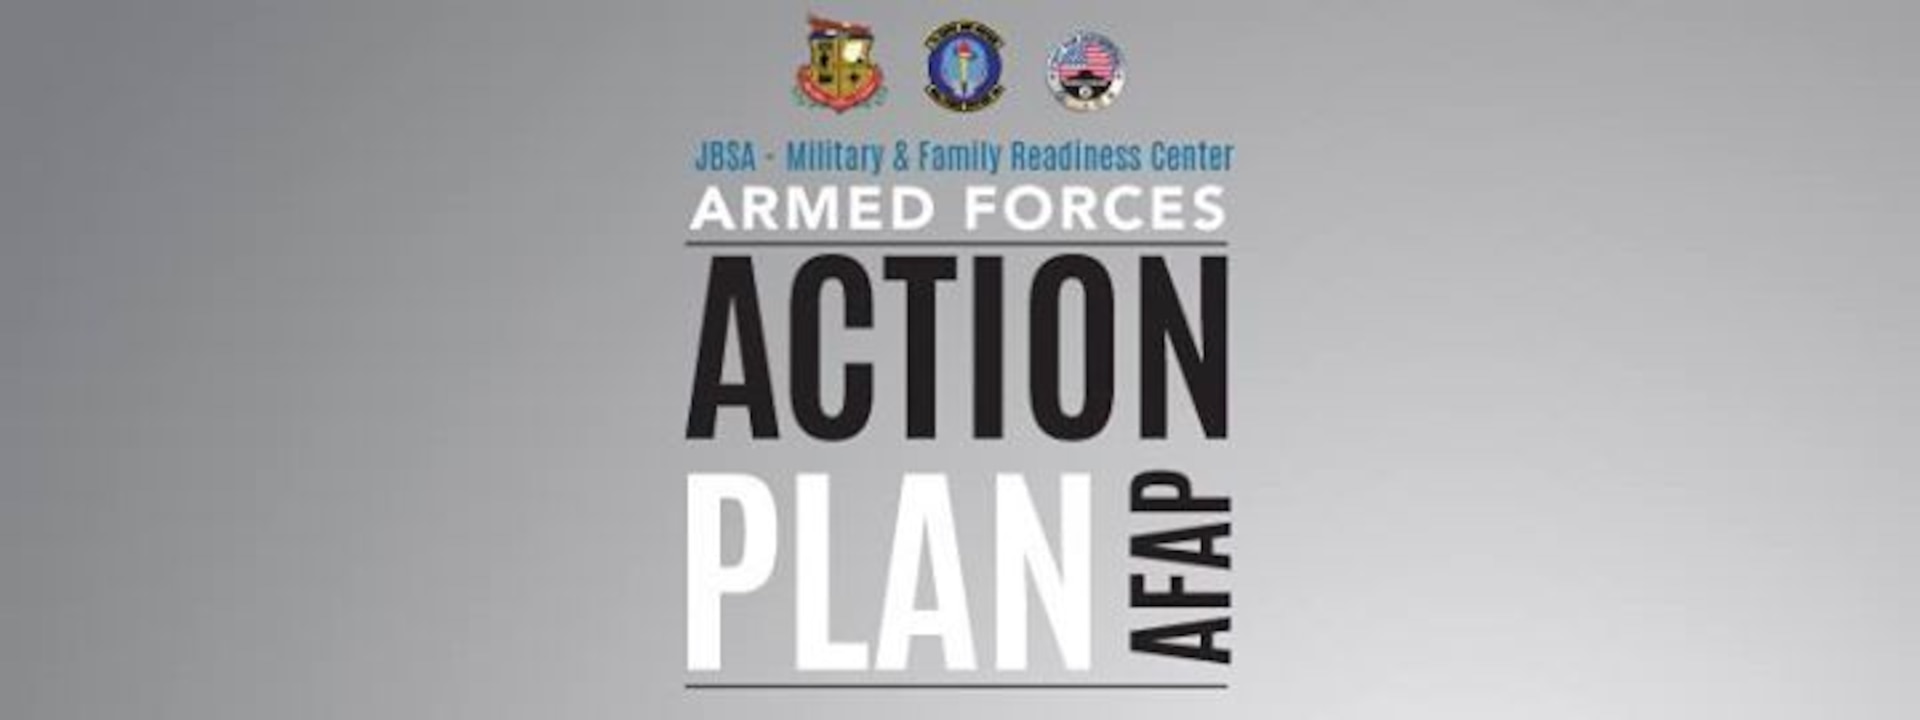 Military service members, including active, Reserve and National Guard, military spouses, family members, retirees, Department of Defense civilians and survivors are invited to participate in the Armed Forces Action Plan Focus Group online from 11 a.m. to 1 p.m. Jan. 27.